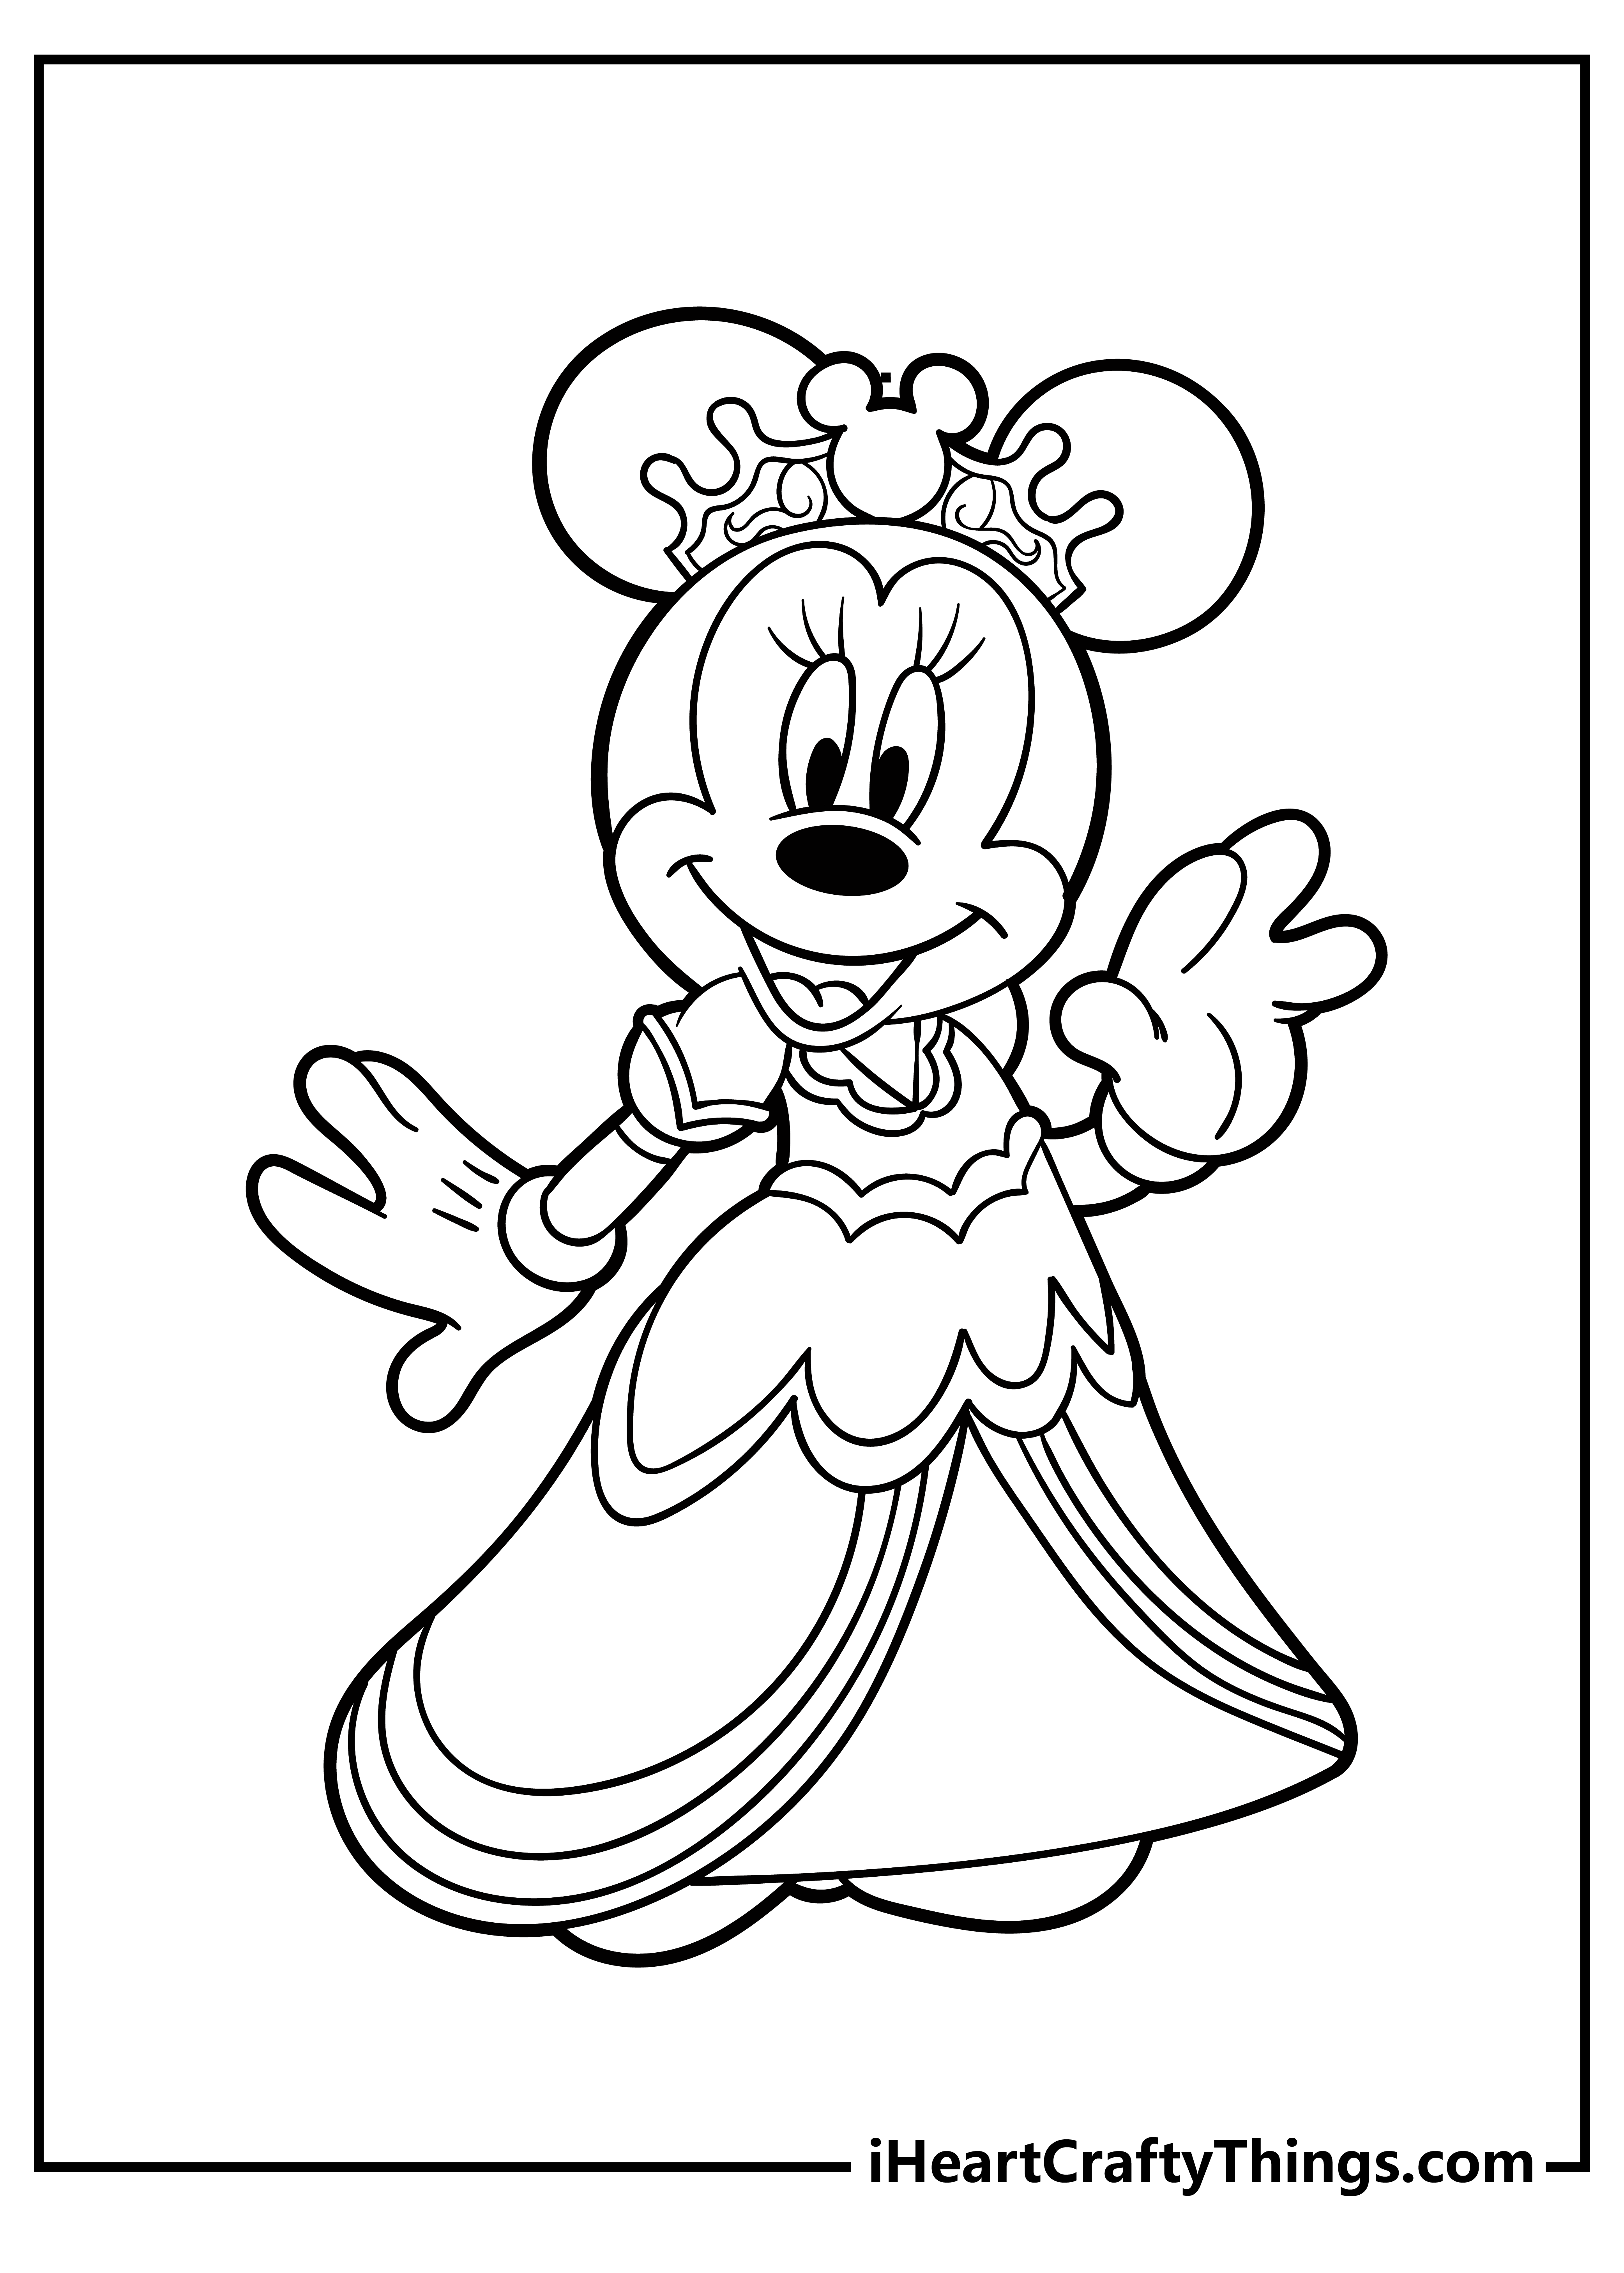 Printable Minnie Mouse Coloring Pages Updated 21